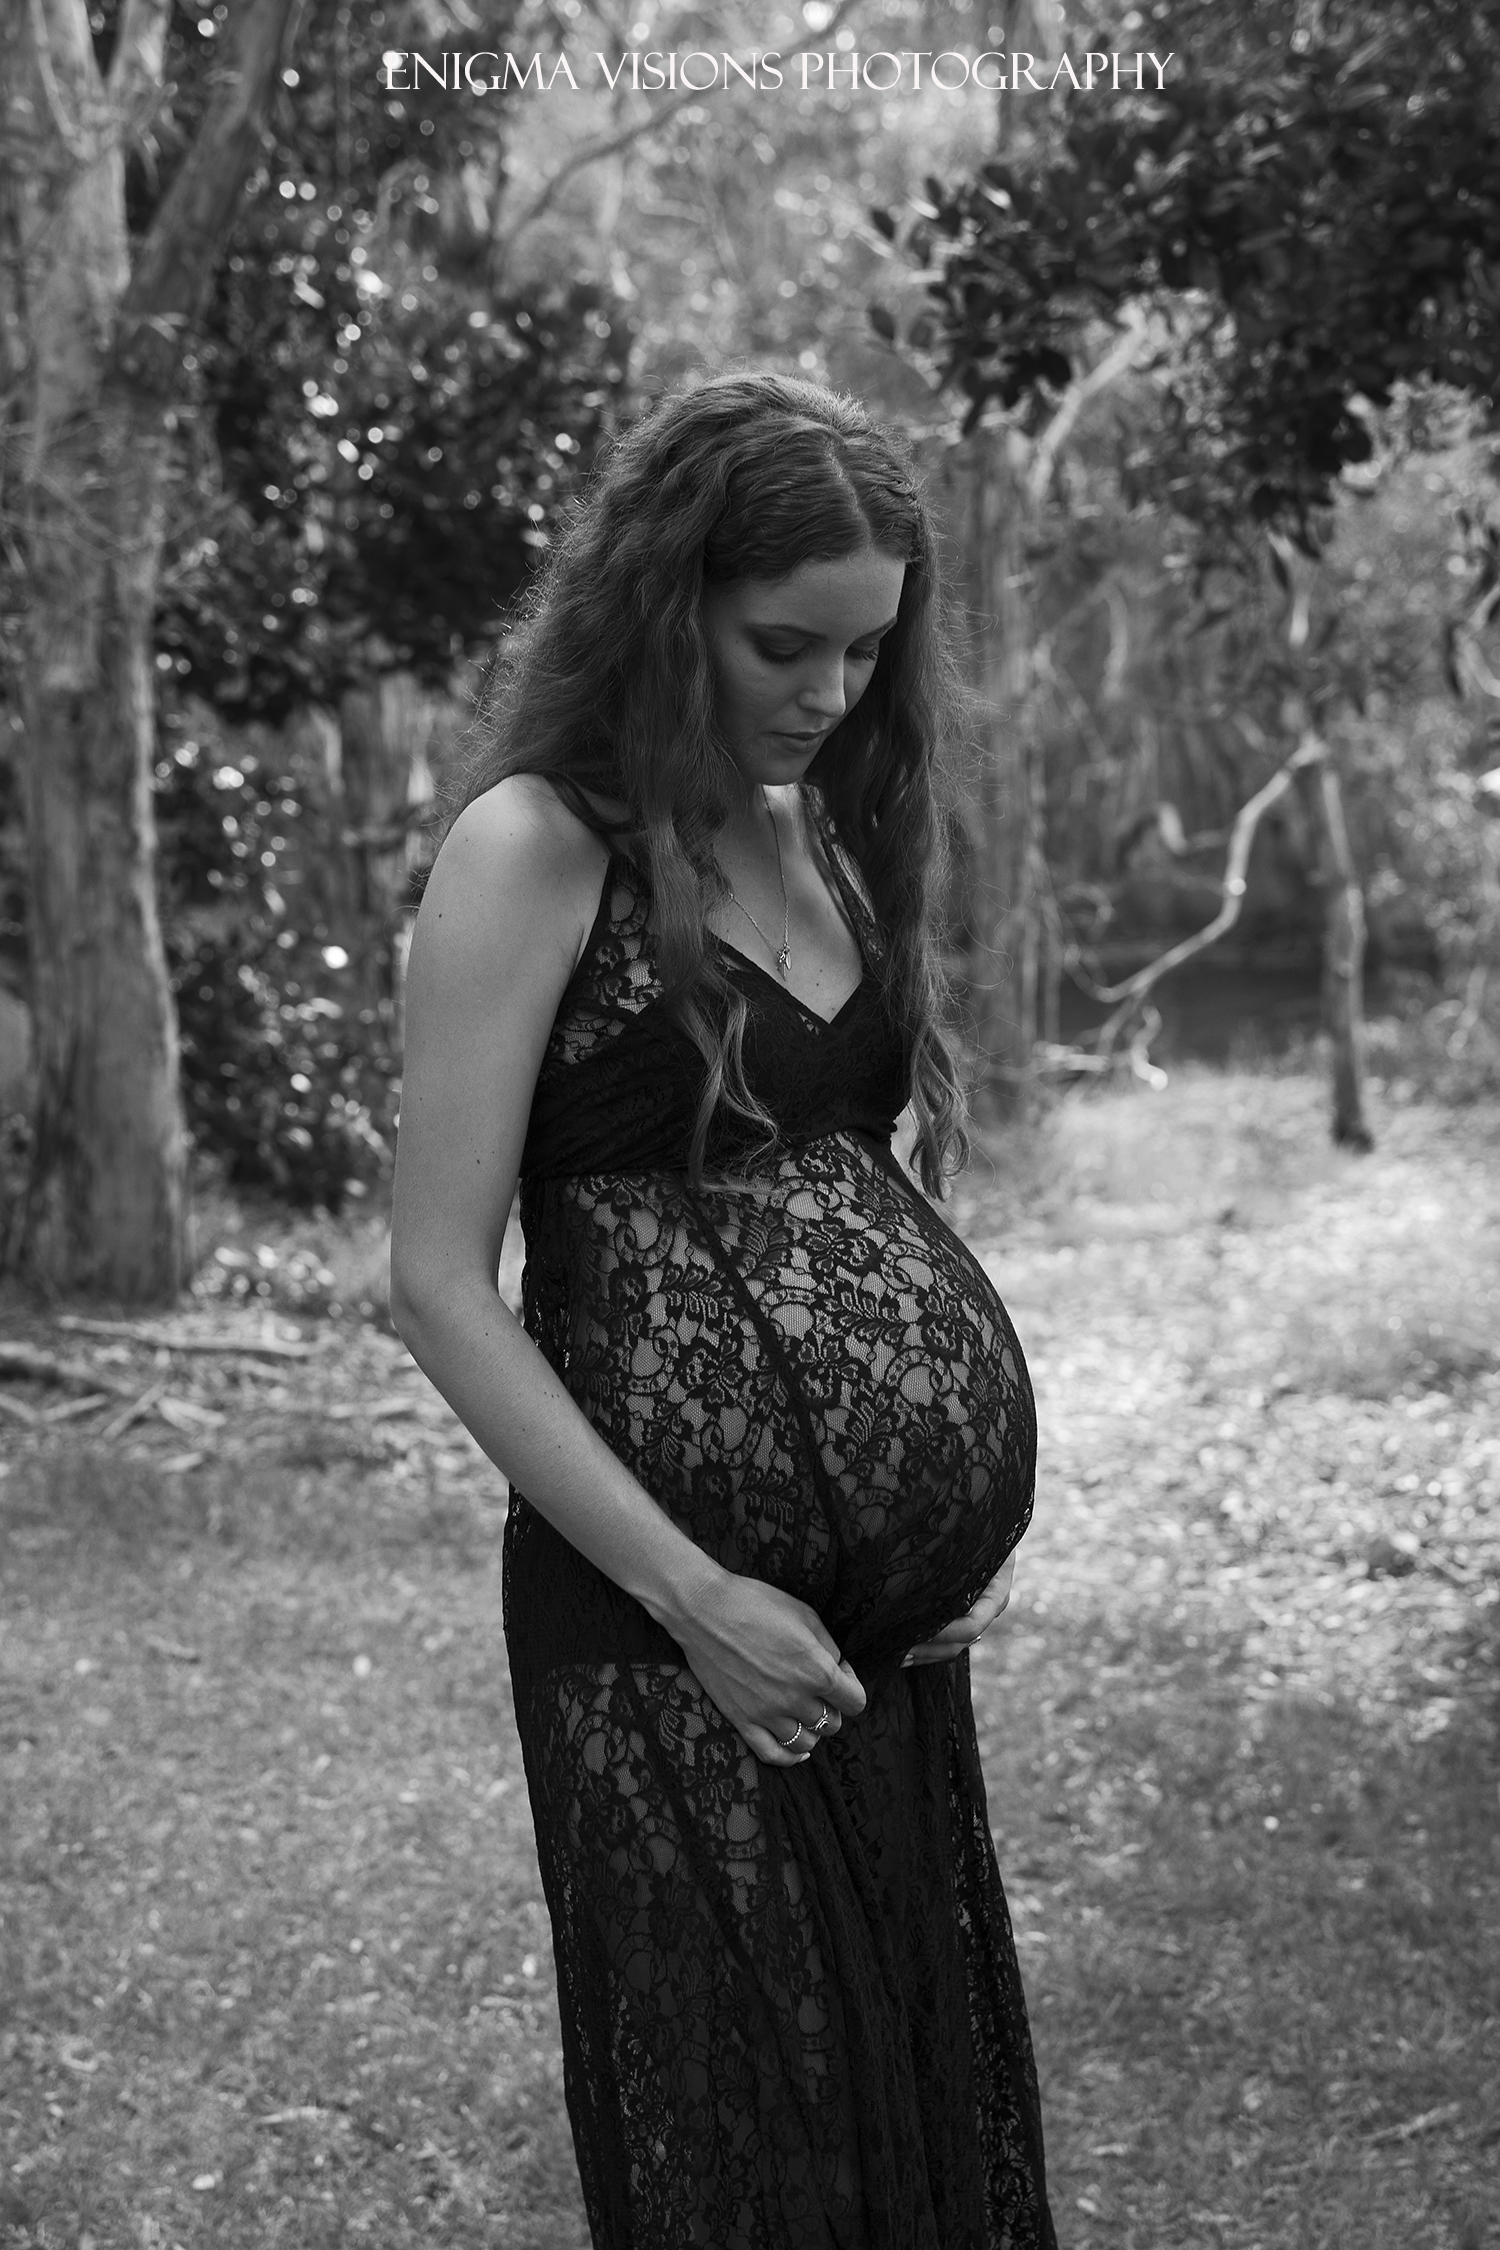 Enigma_Visions_Photography_Maternity_Mahlea007.jpg